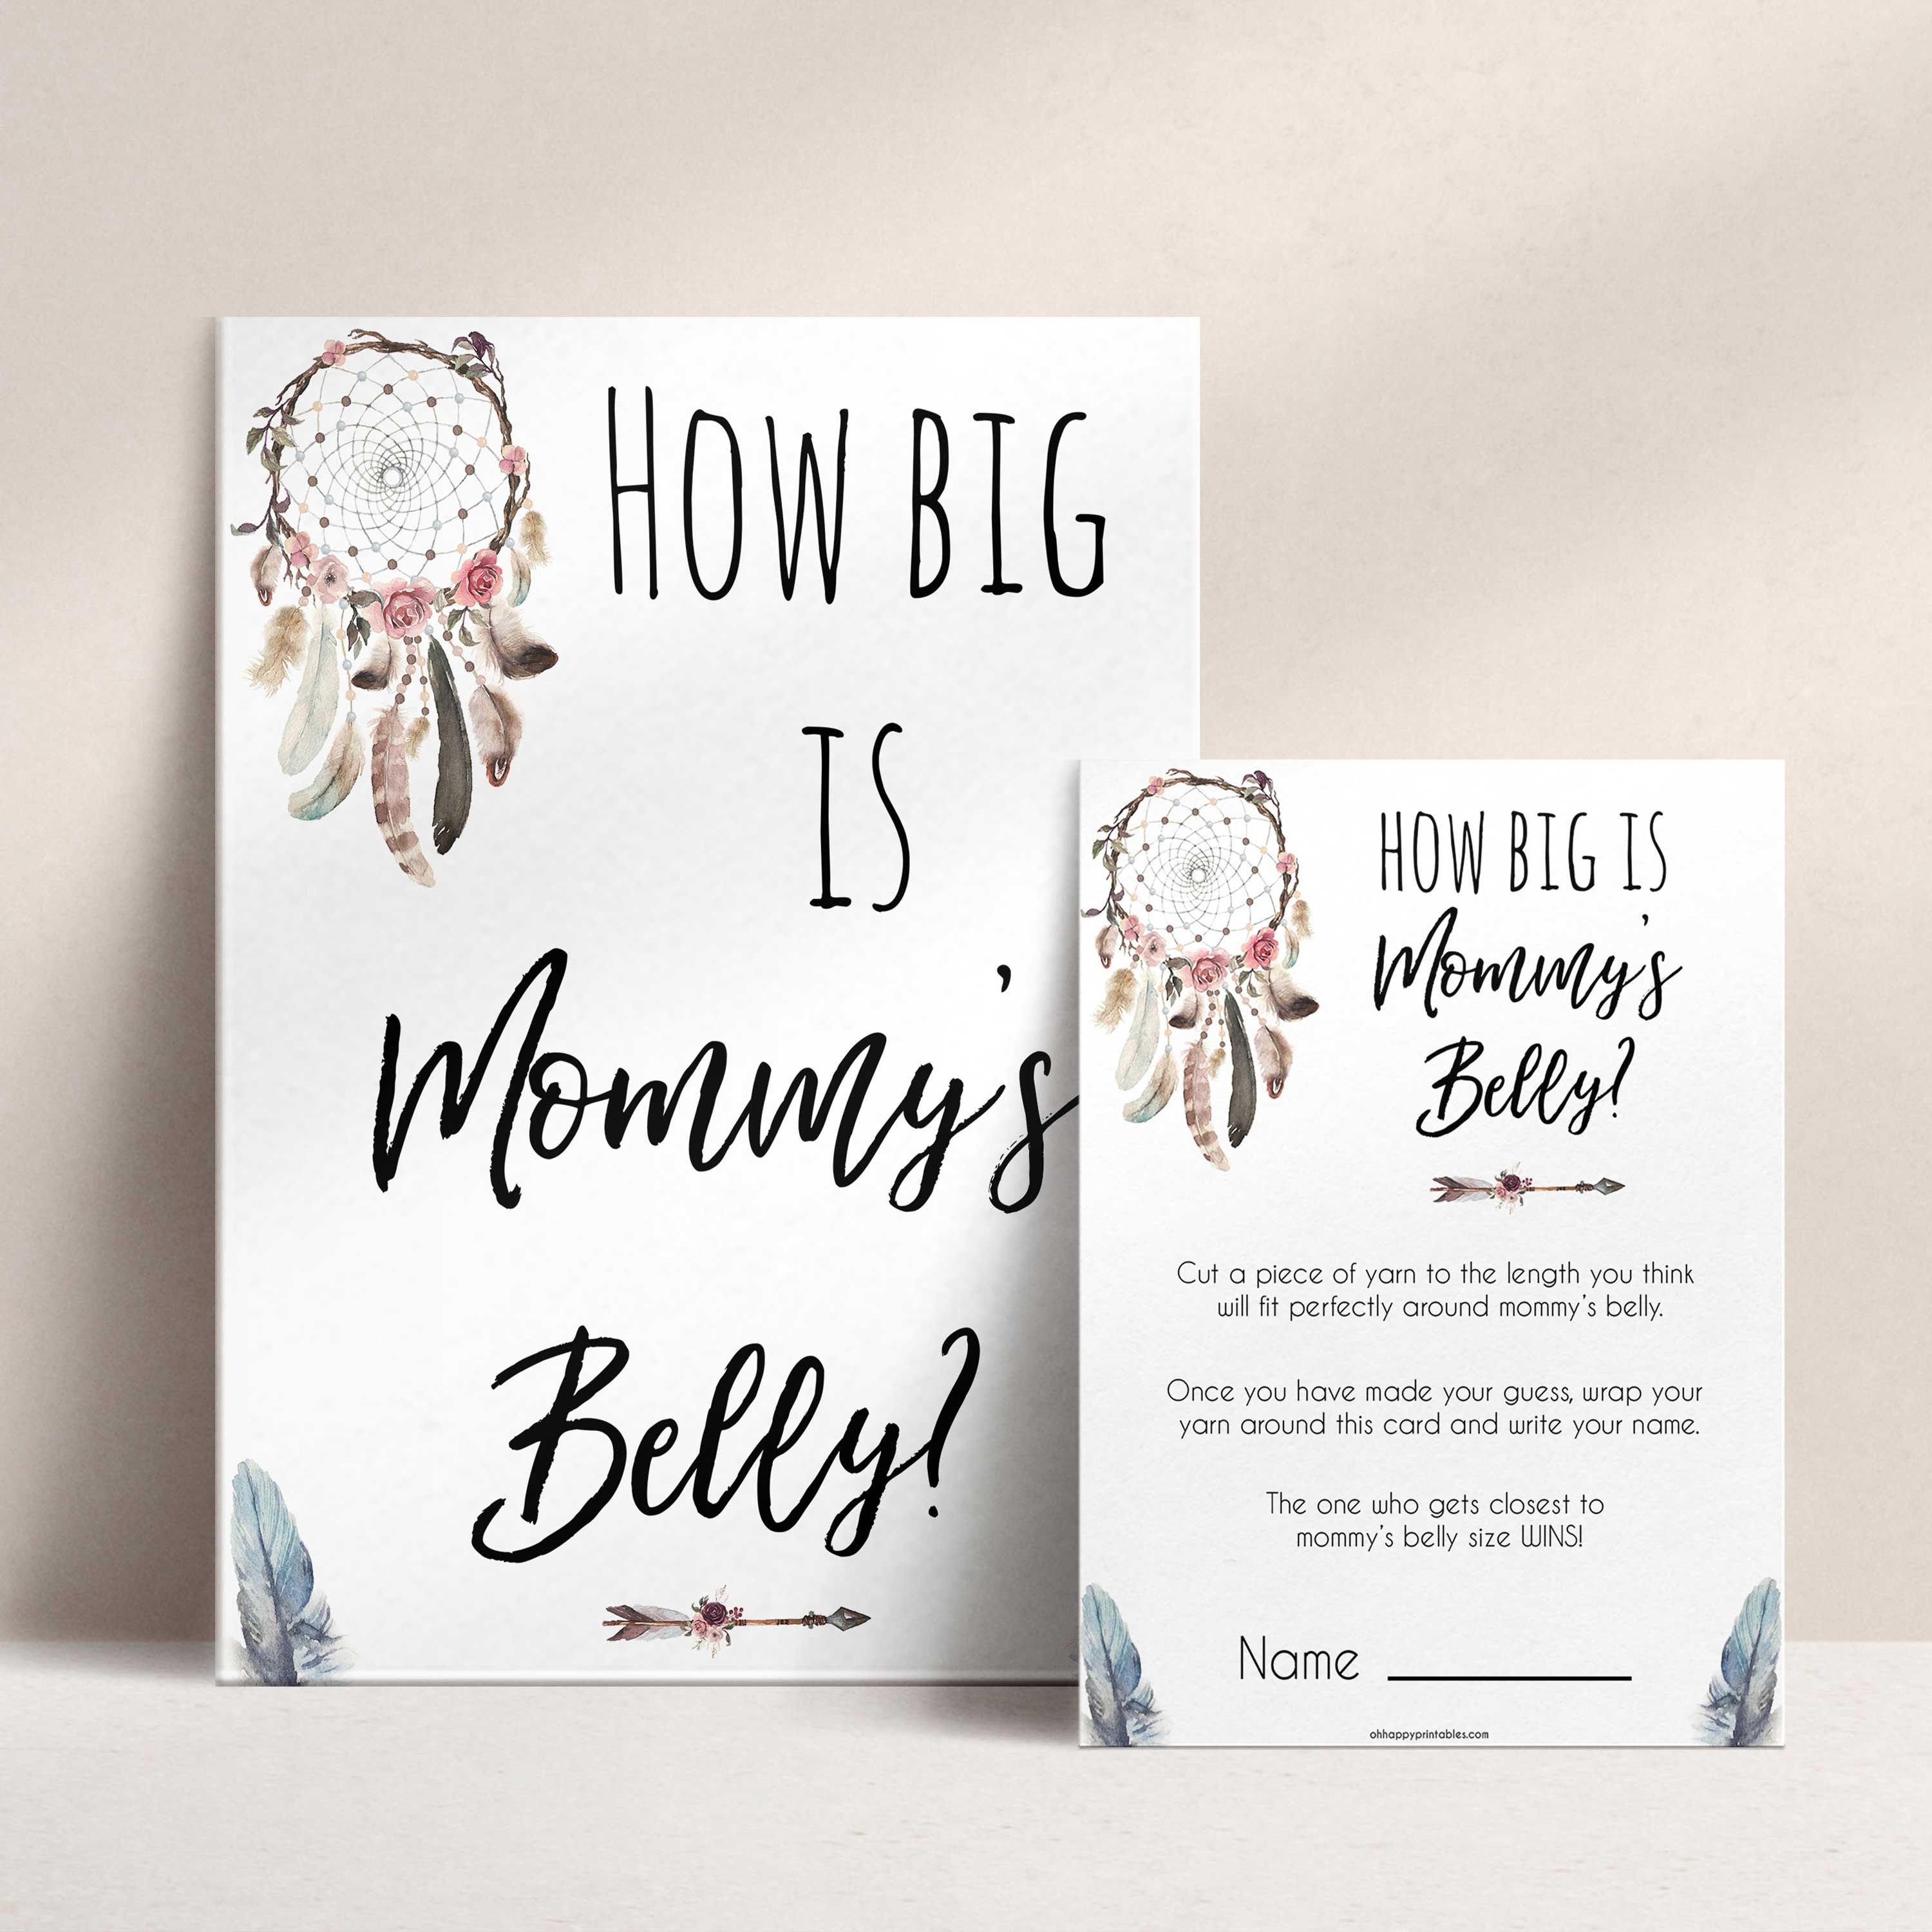 Boho baby games, how big is mommys belly baby game, fun baby games, printable baby games, top 10 baby games, boho baby shower, baby games, hilarious baby games